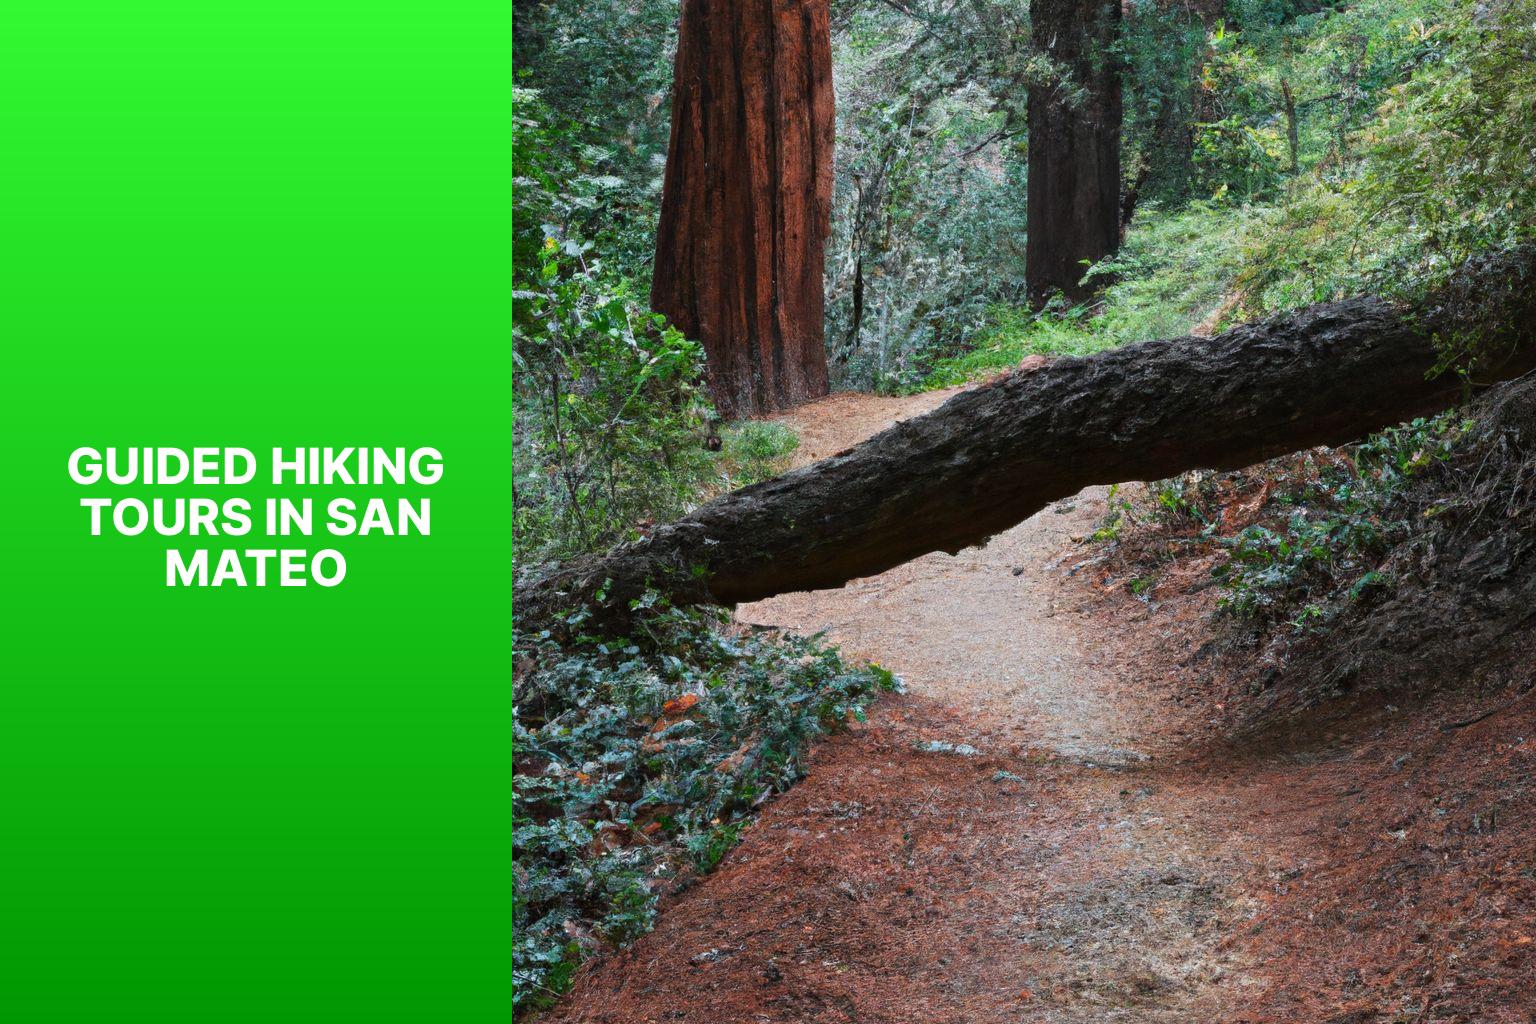 Guided Hiking Tours in San Mateo - Hikes in San Mateo 